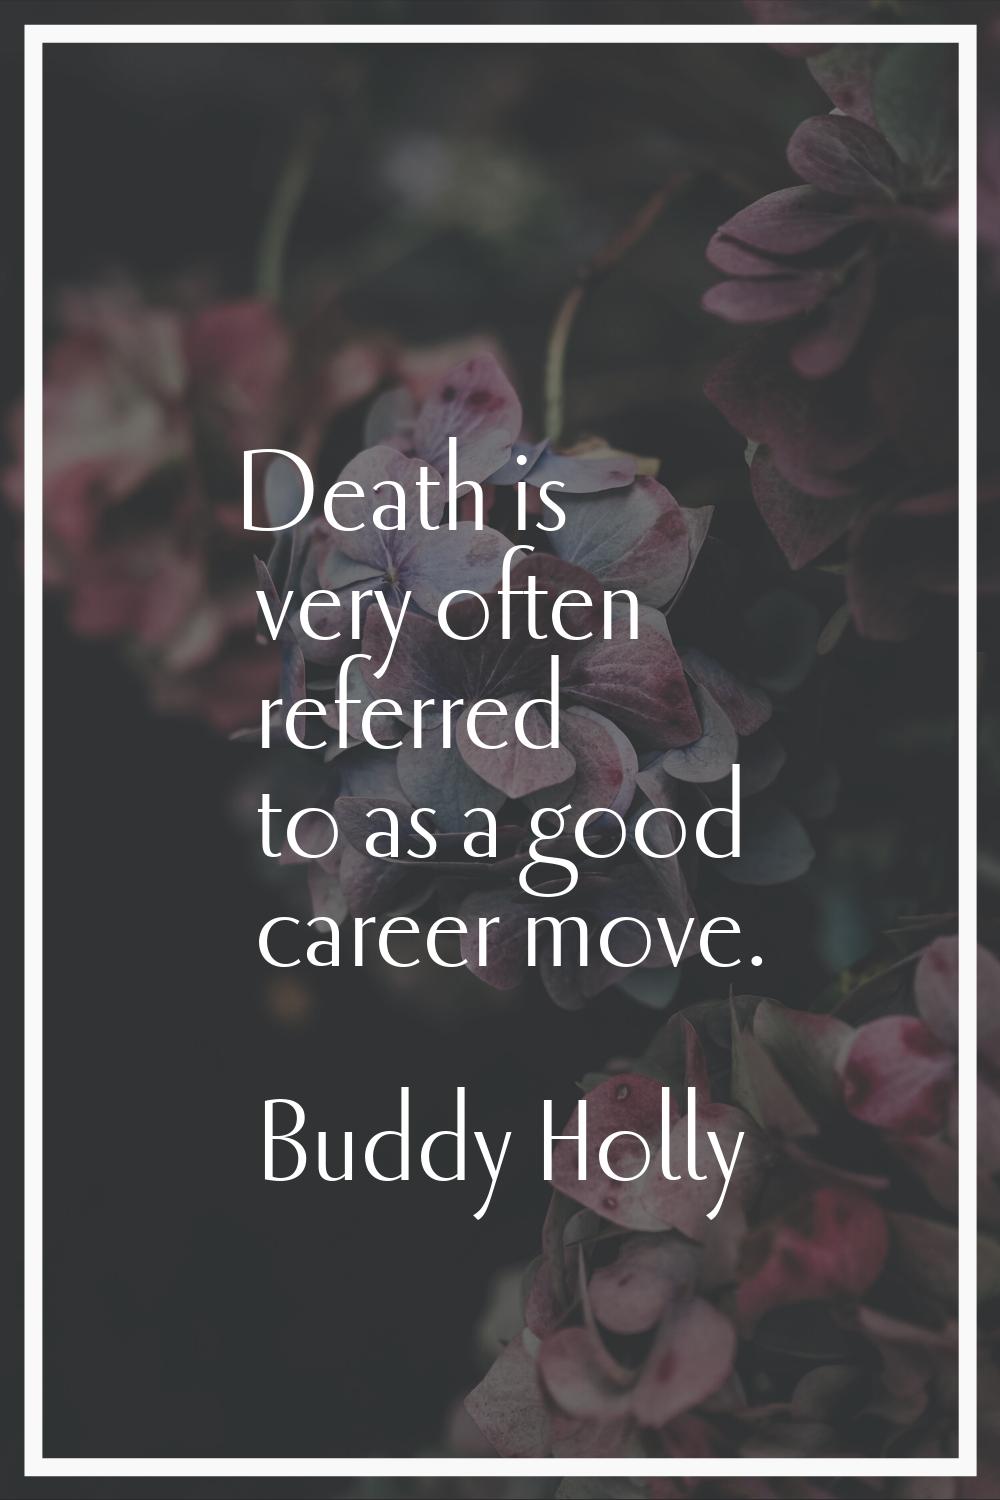 Death is very often referred to as a good career move.